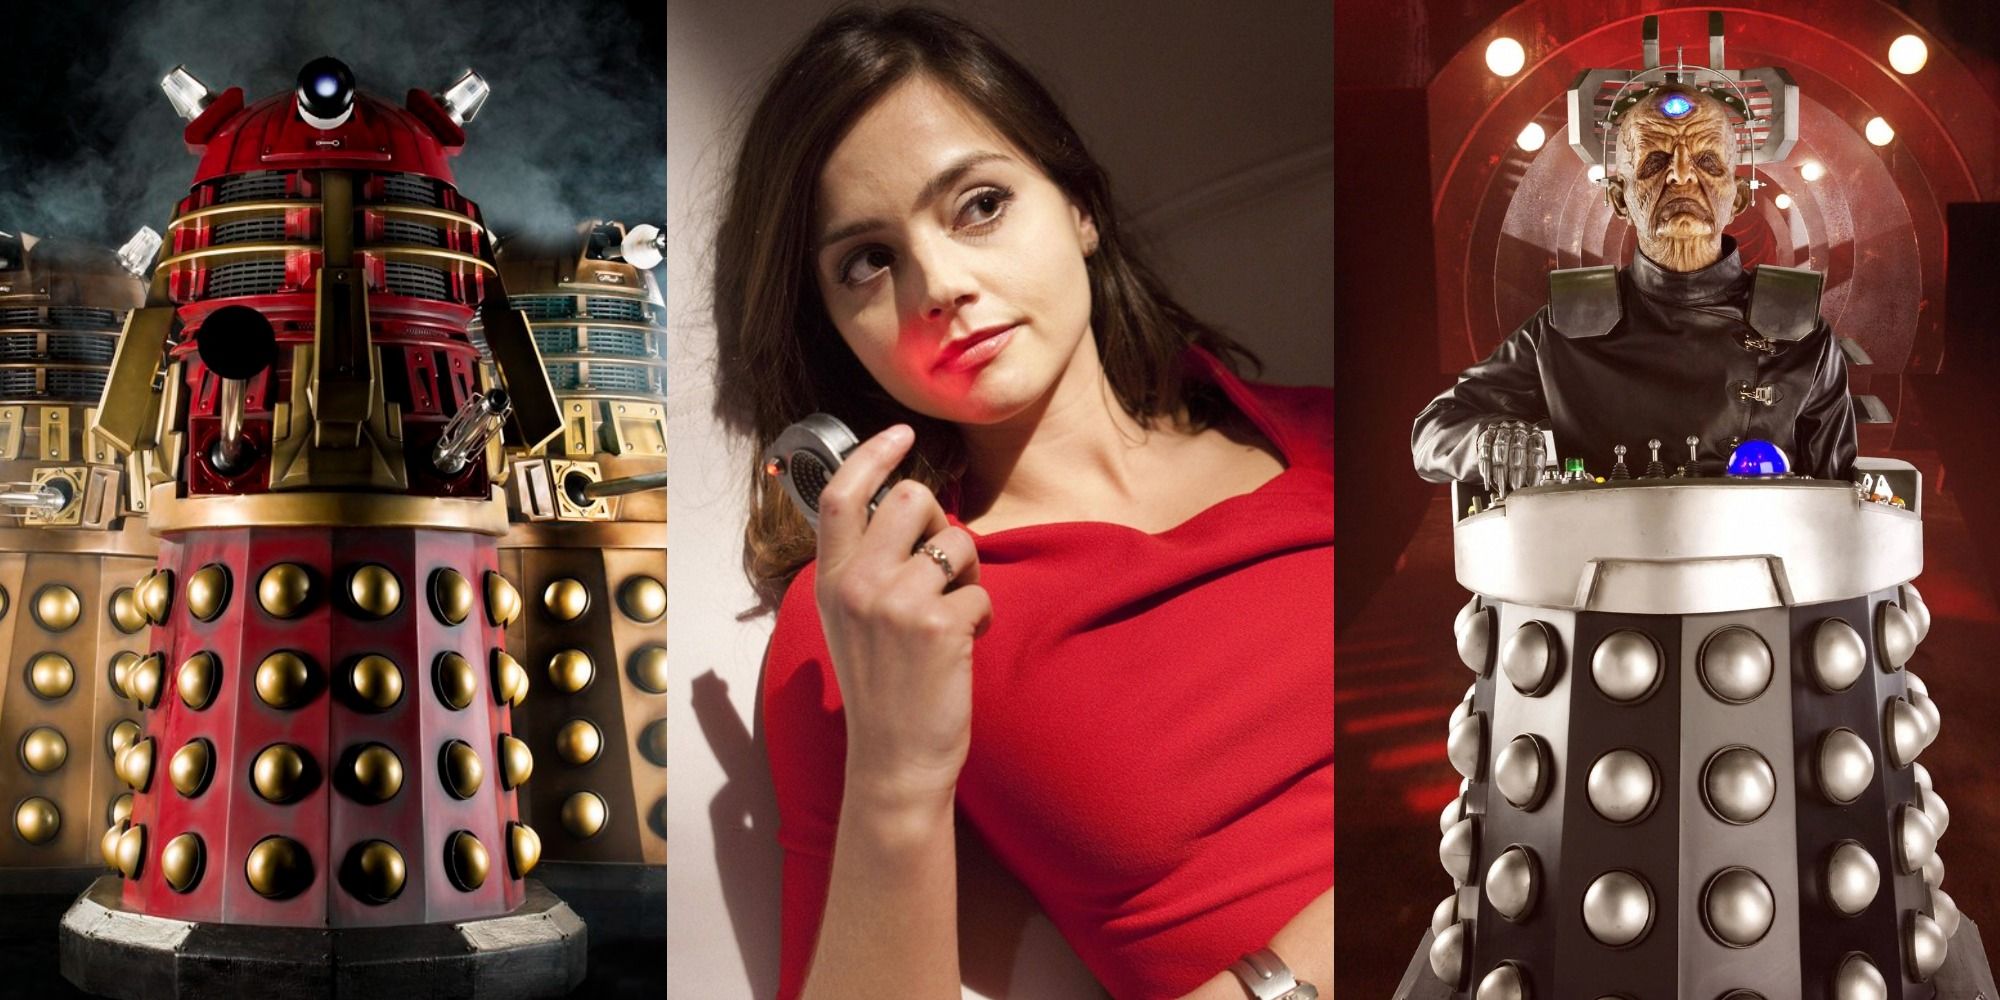 The supreme Dalek, Oswin Oswald, and Davros in Doctor Who